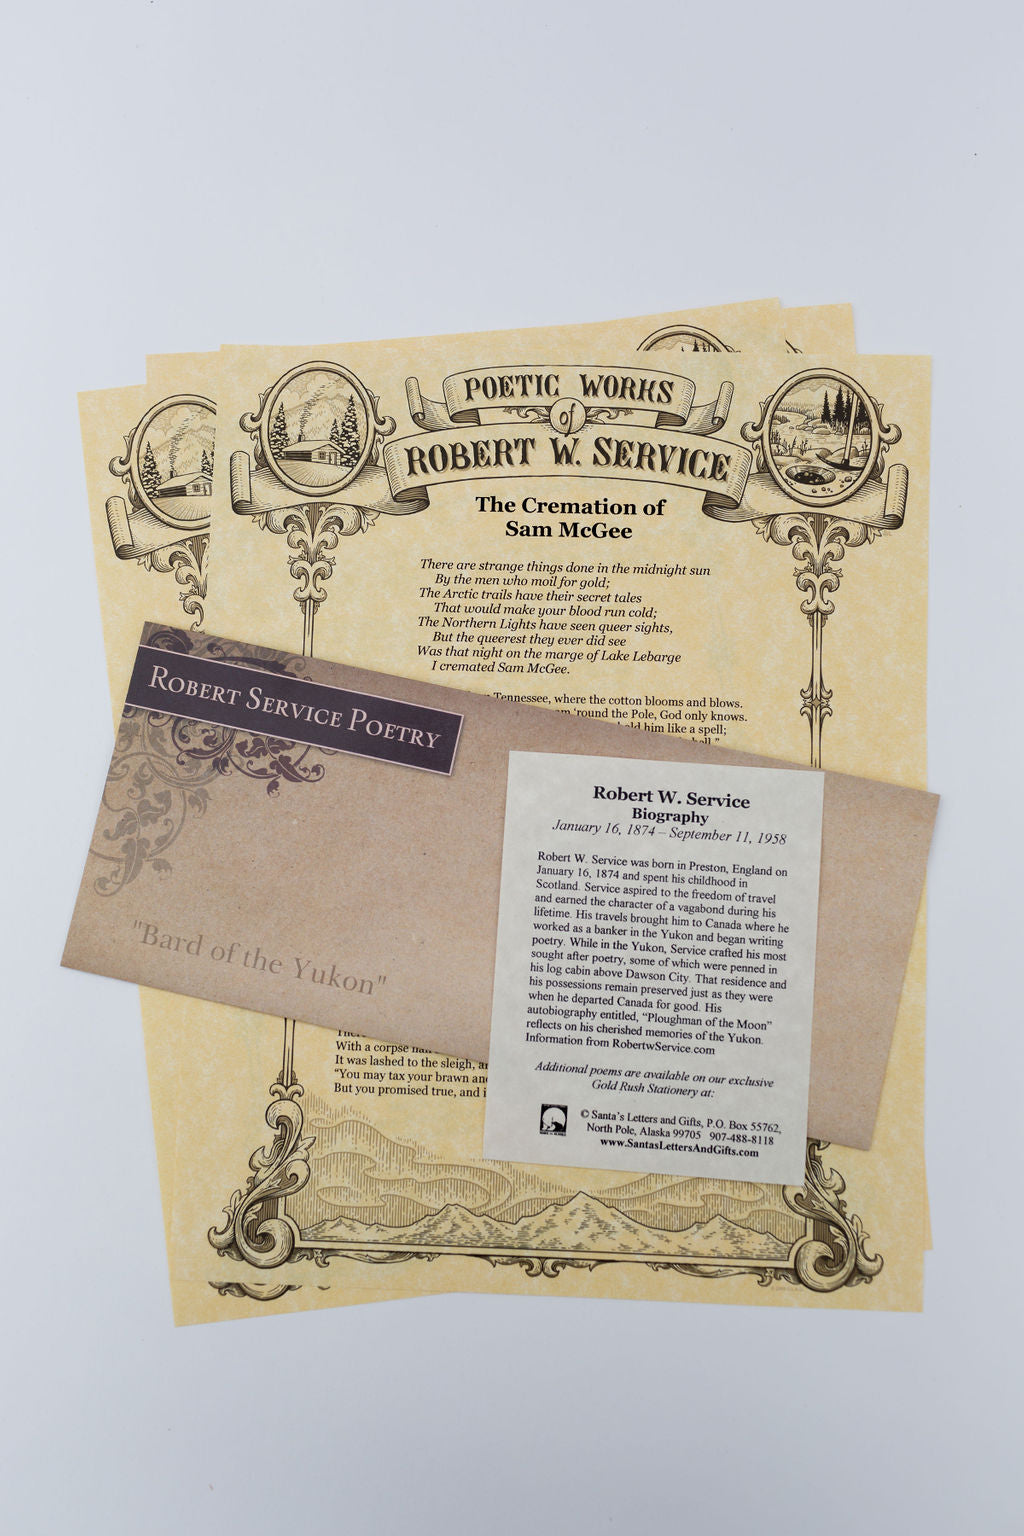 Purchase the Bundle of 4 Service Poems and save 15%! Poems are printed on our gold rush stationery from commissioned artwork, featuring Robert Service's cabin in Dawson, Klondike gold rush elements, and the Northern Lights swirling over the hills in Dawson, Yukon. Ornate design printed with black and metallic gold ink on parchment paper. Poems enclosed in vintage designed envelope with short bio. Available from PamelaSueArtandDesigns.com - Alaska.